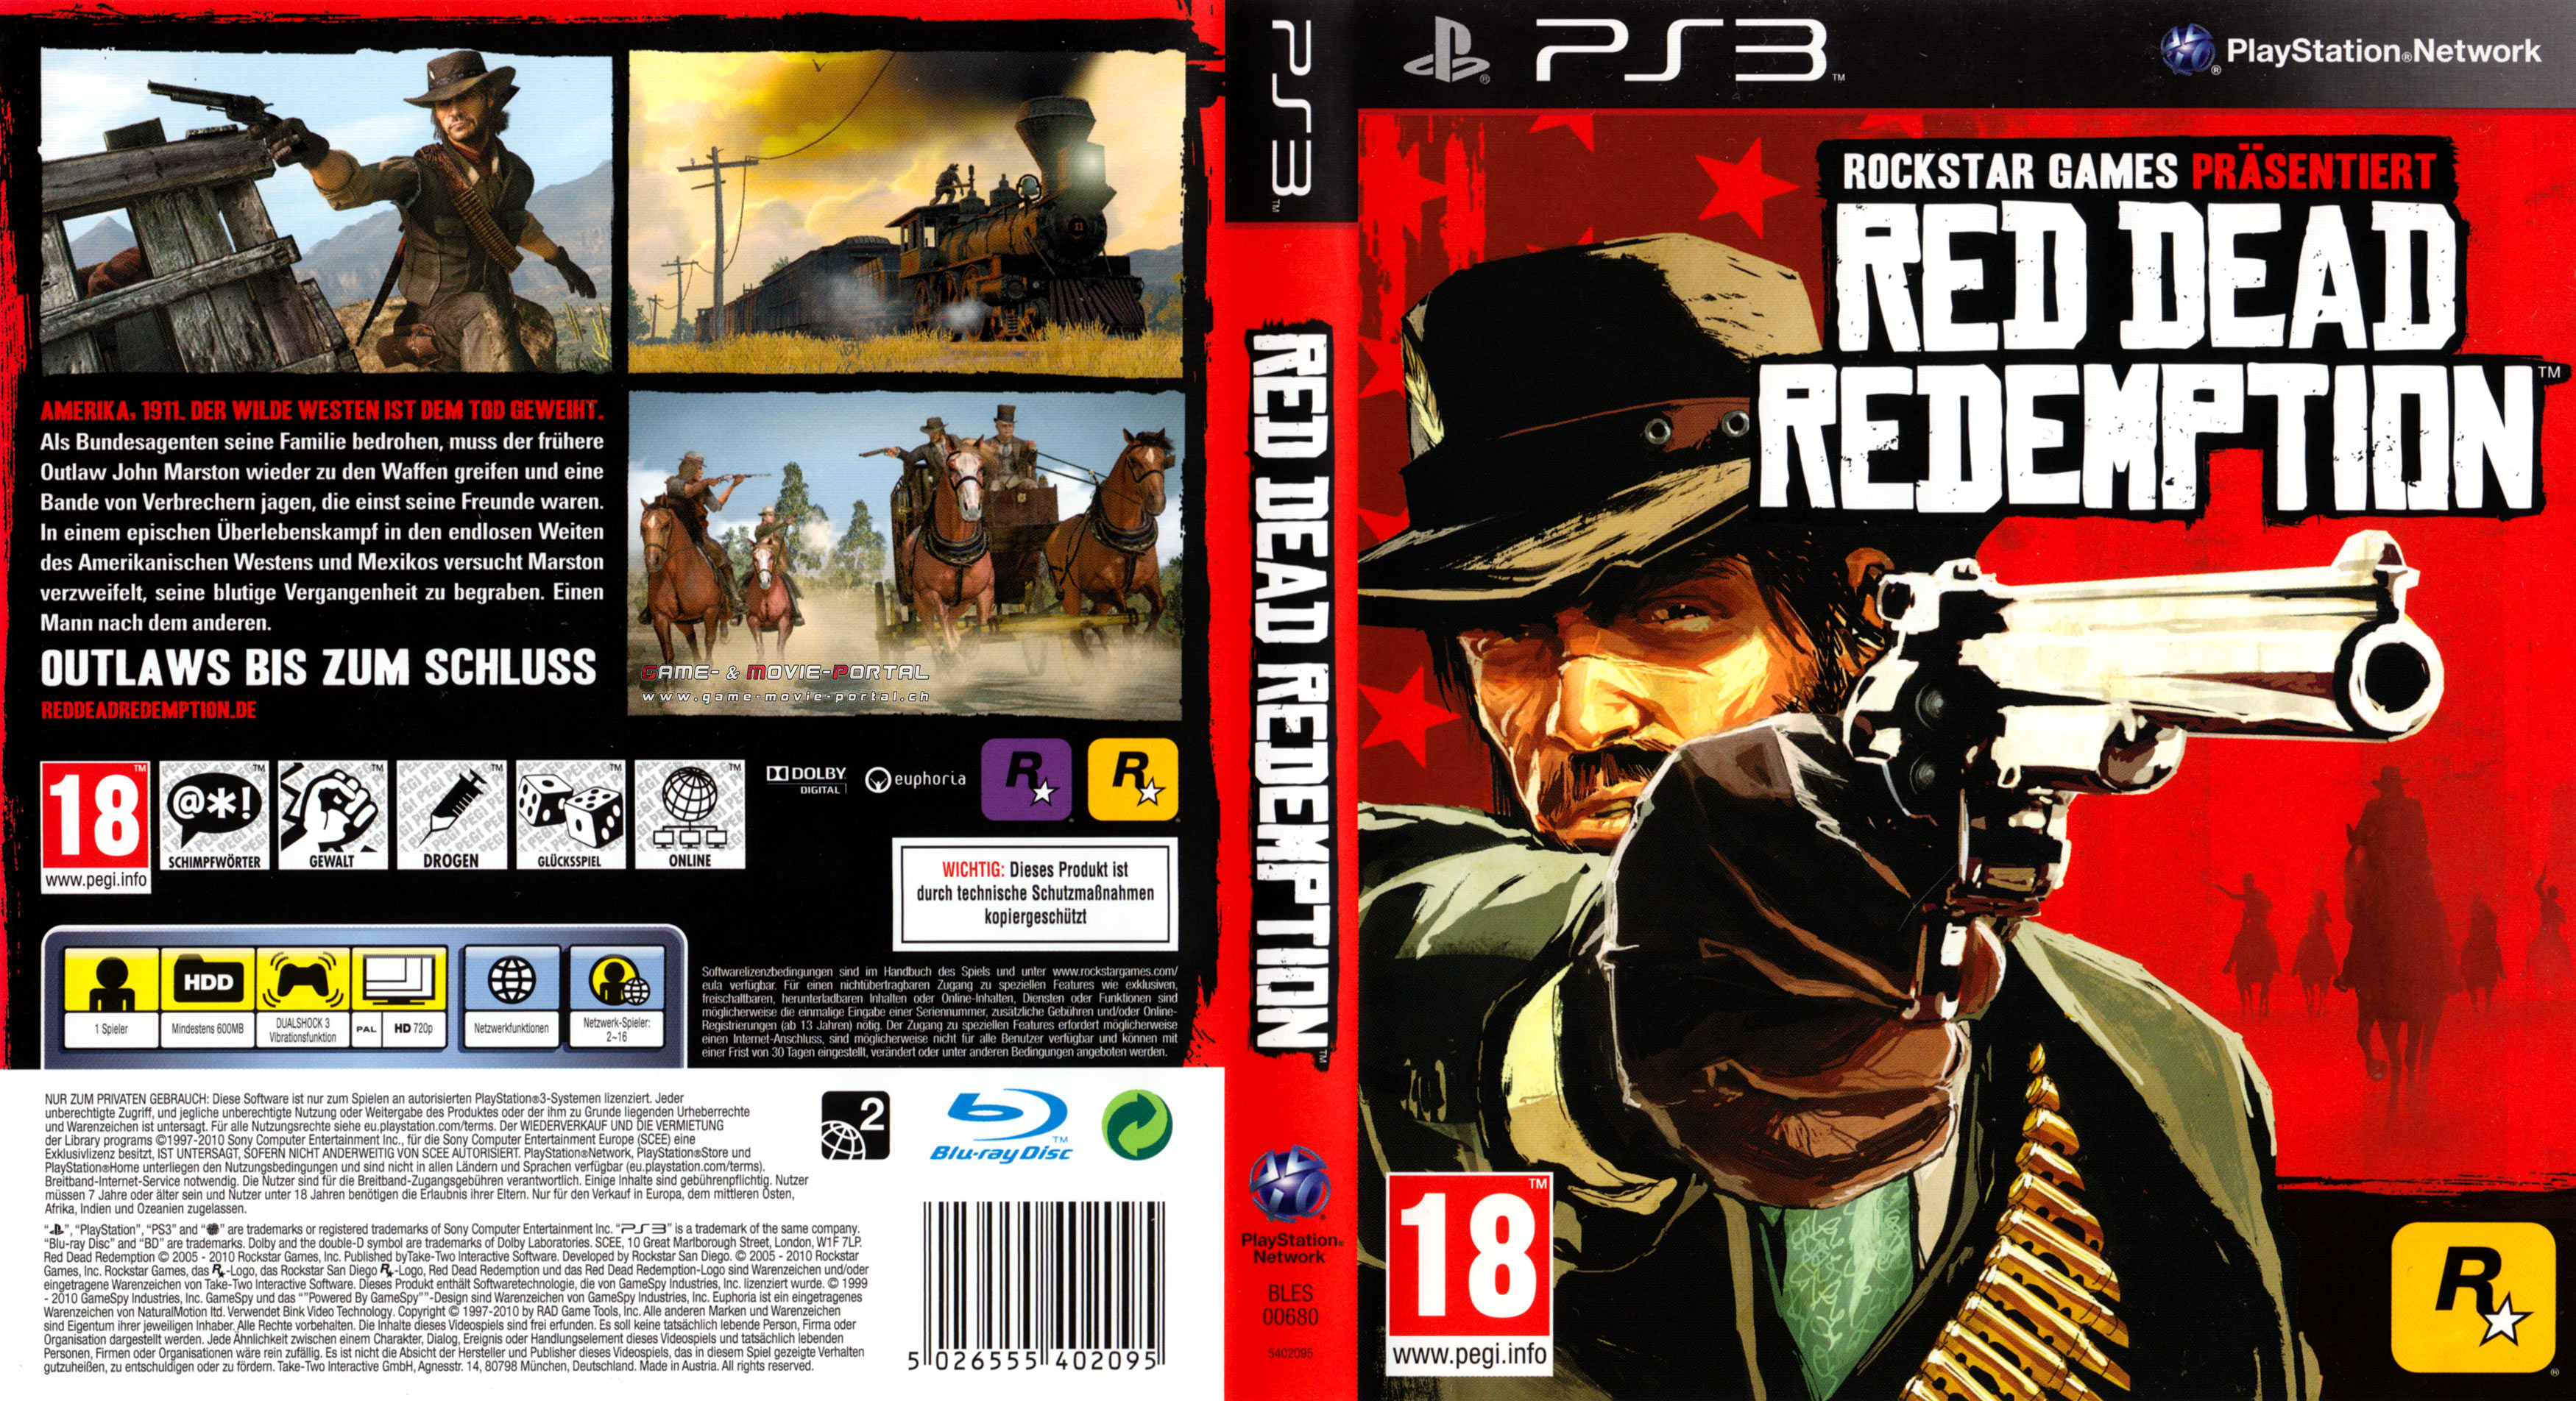 Red Dead Redemption Cover Art All in one Photos.